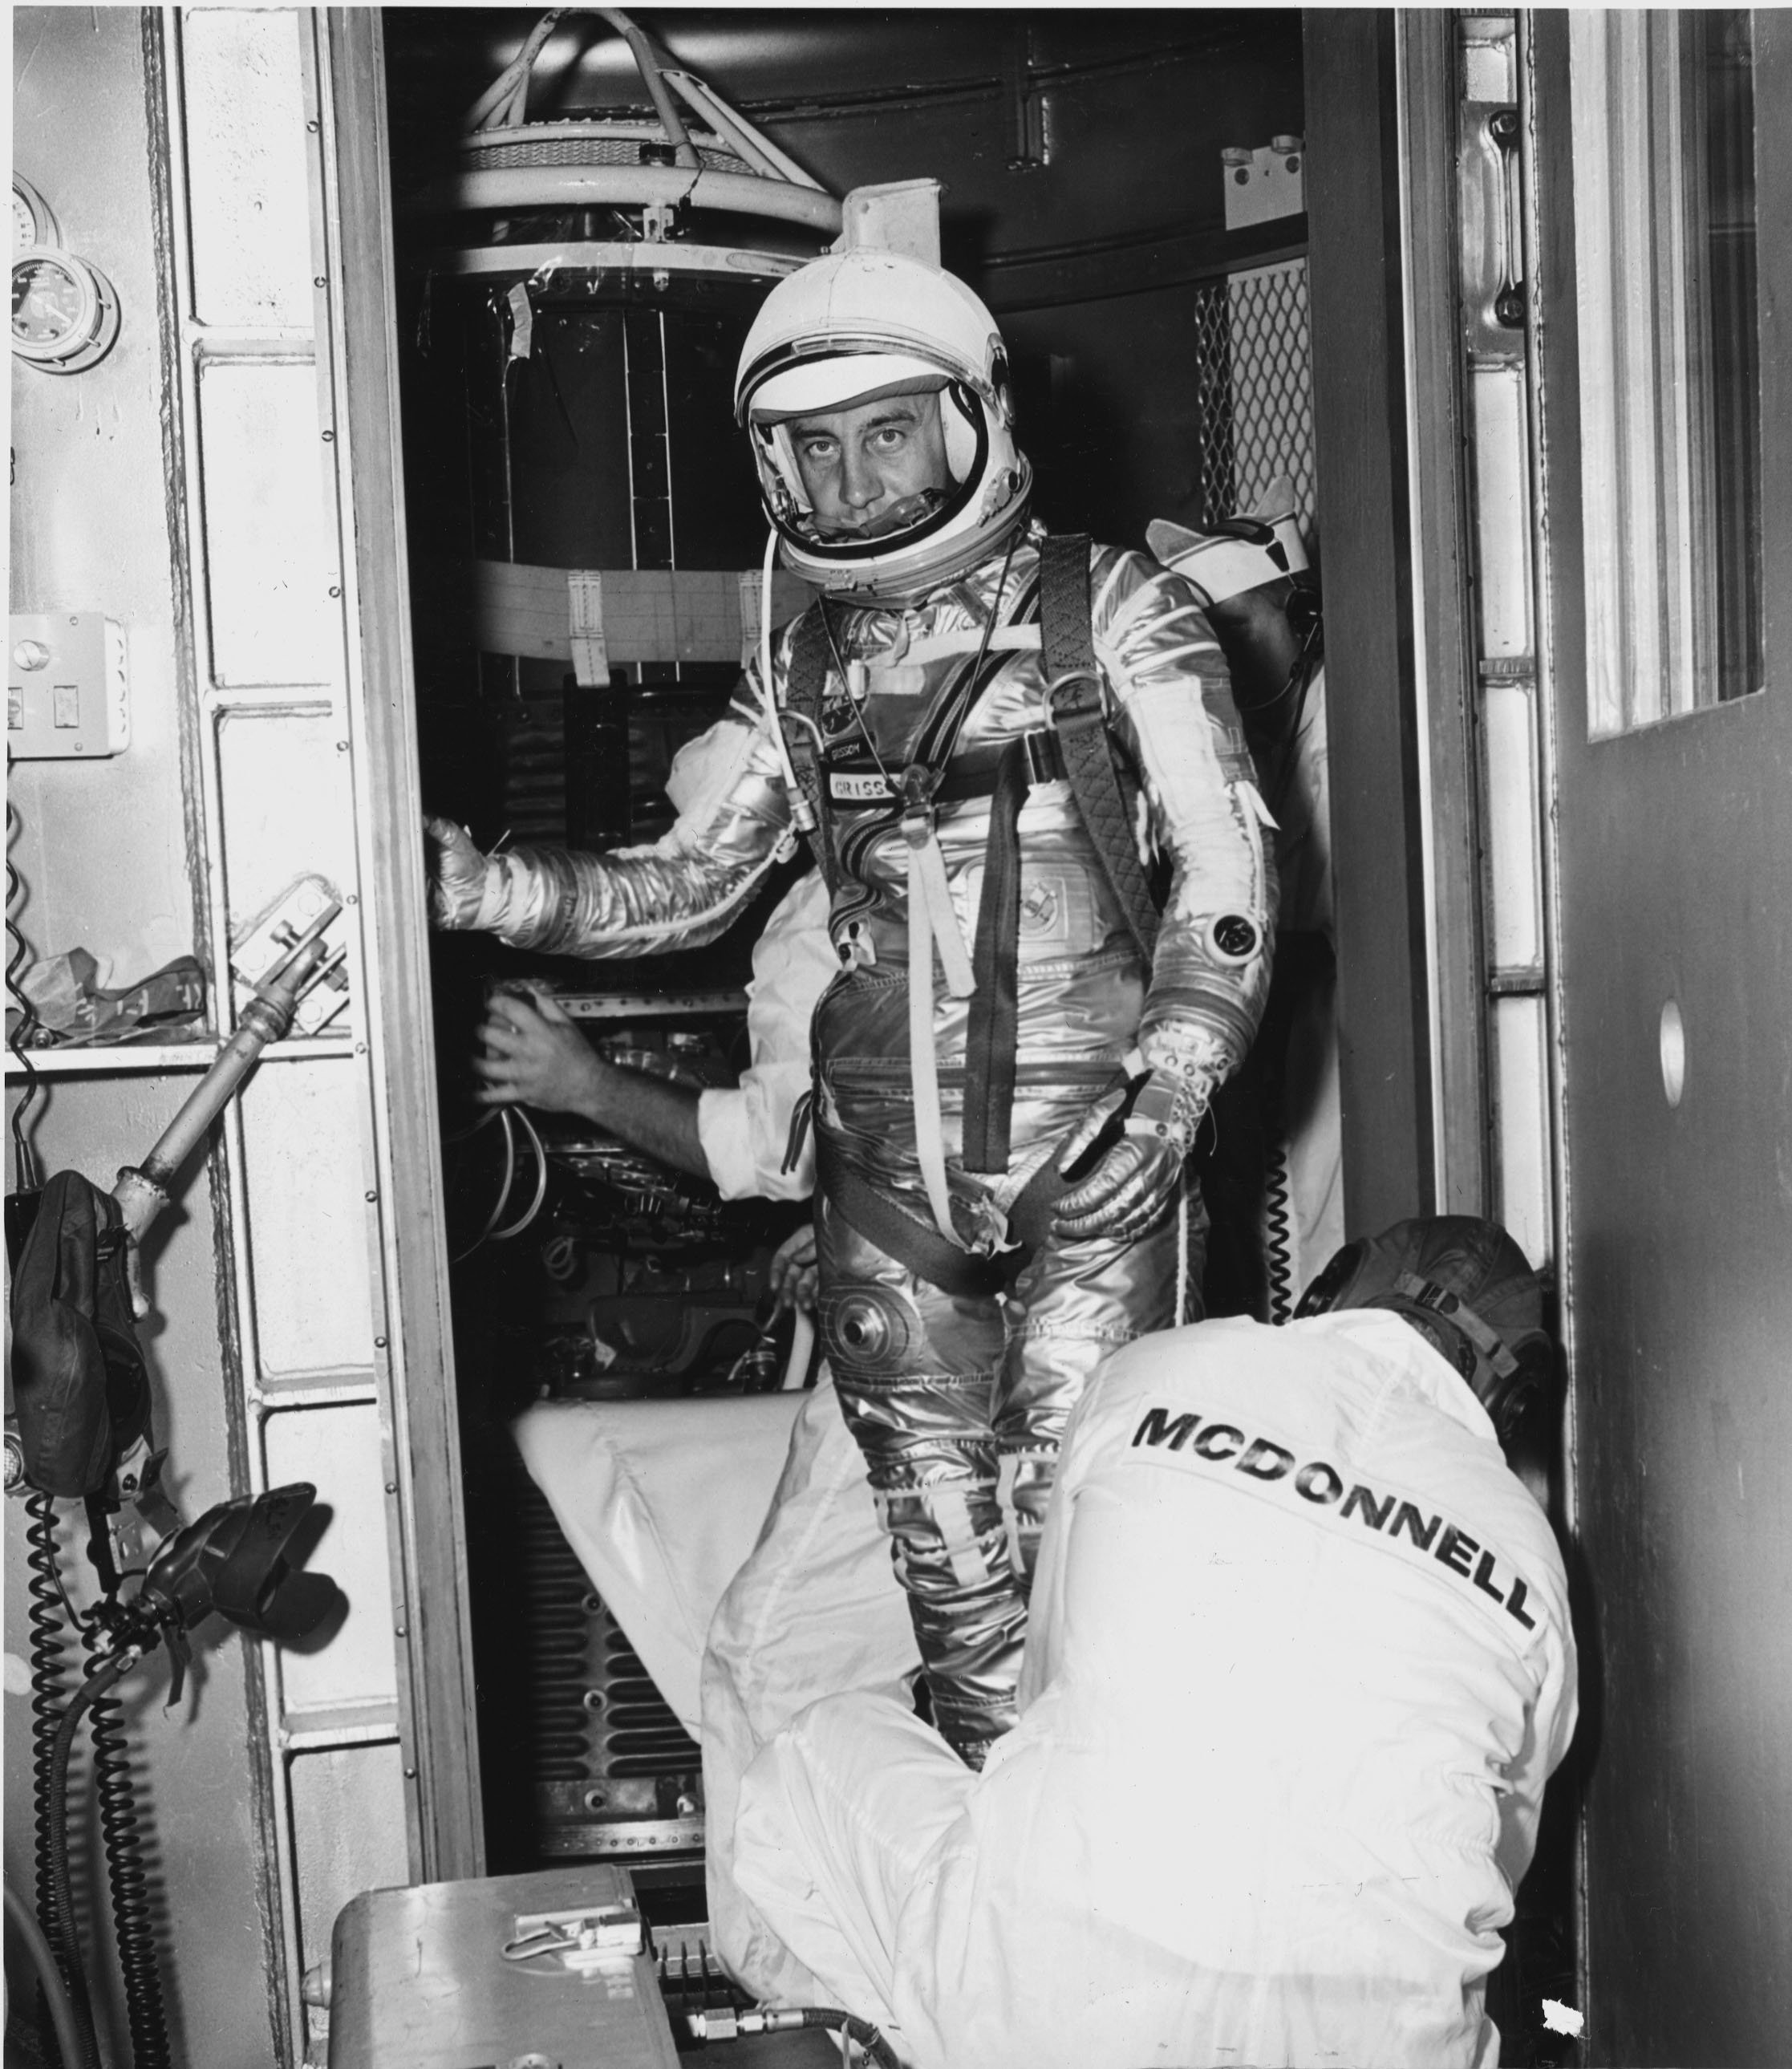 Gus Grissom after taking part in simulated flight 61-MR4-48